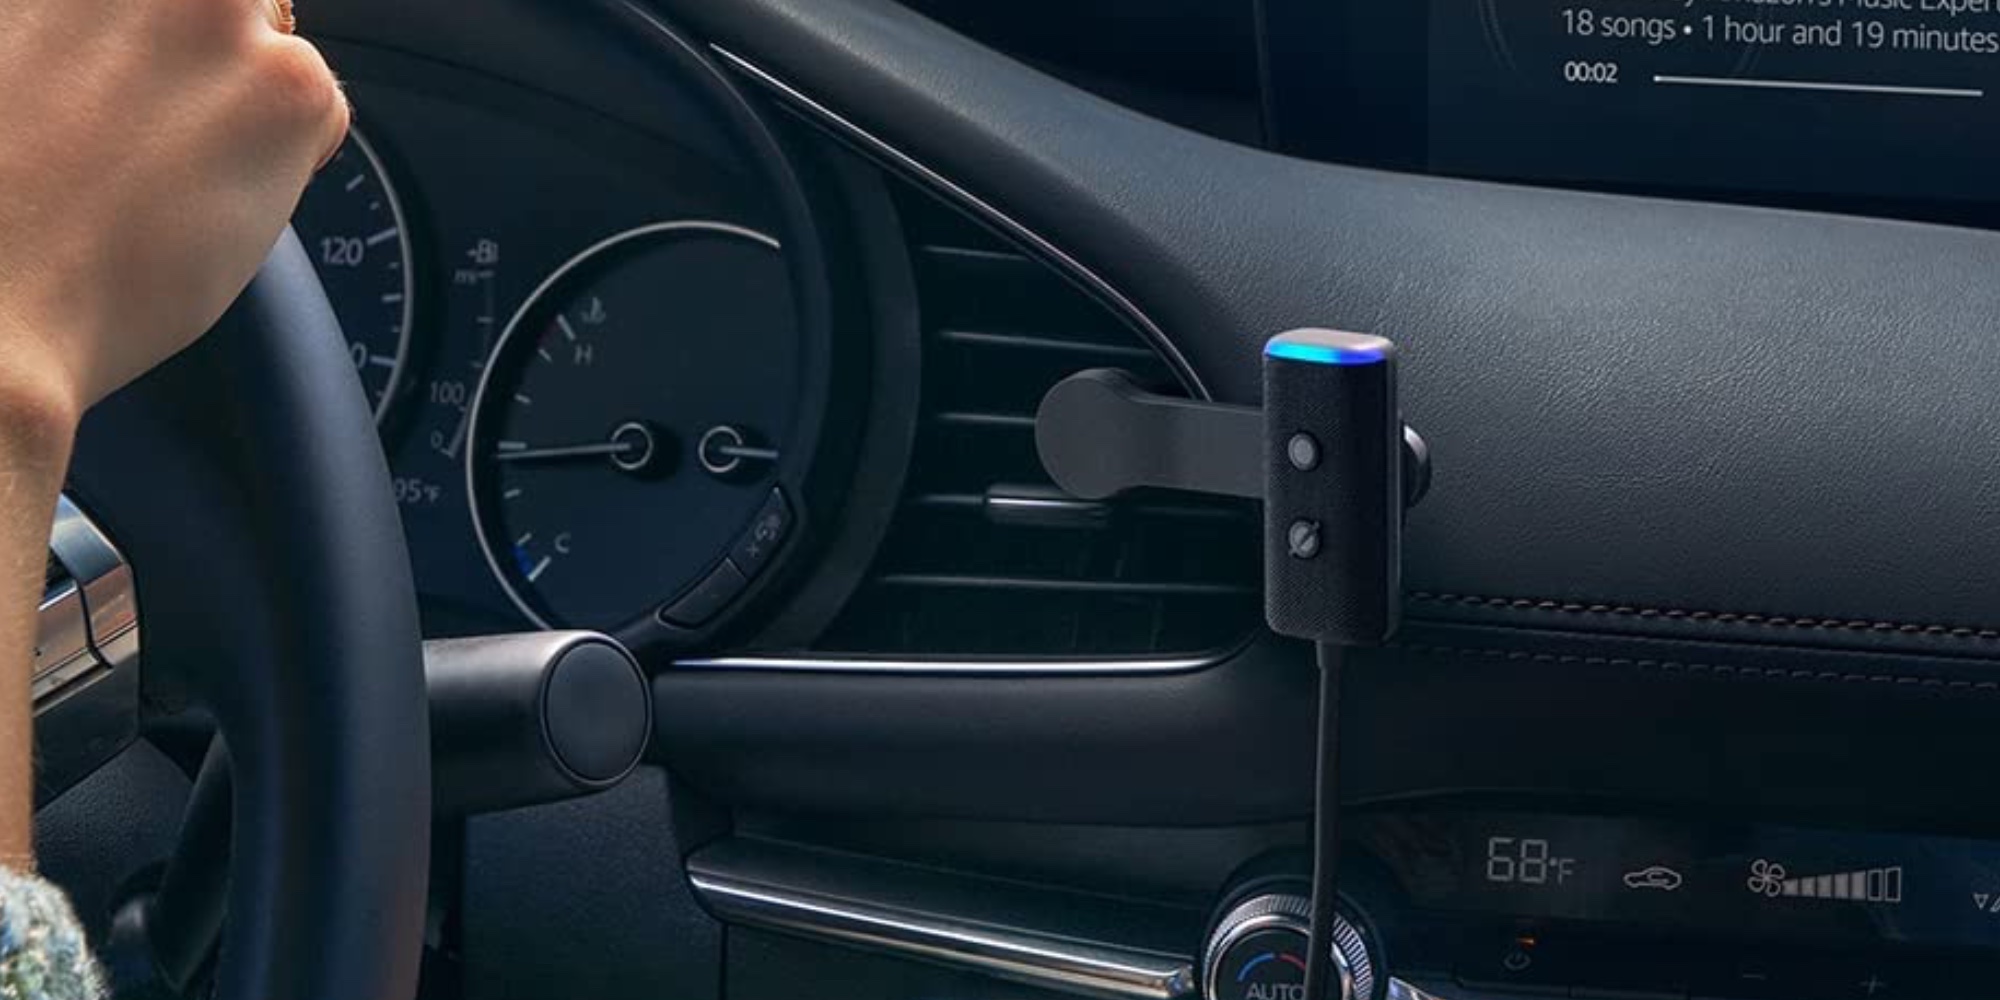 Echo Auto 2nd-Gen: Bring Alexa on Your Commute or Travels